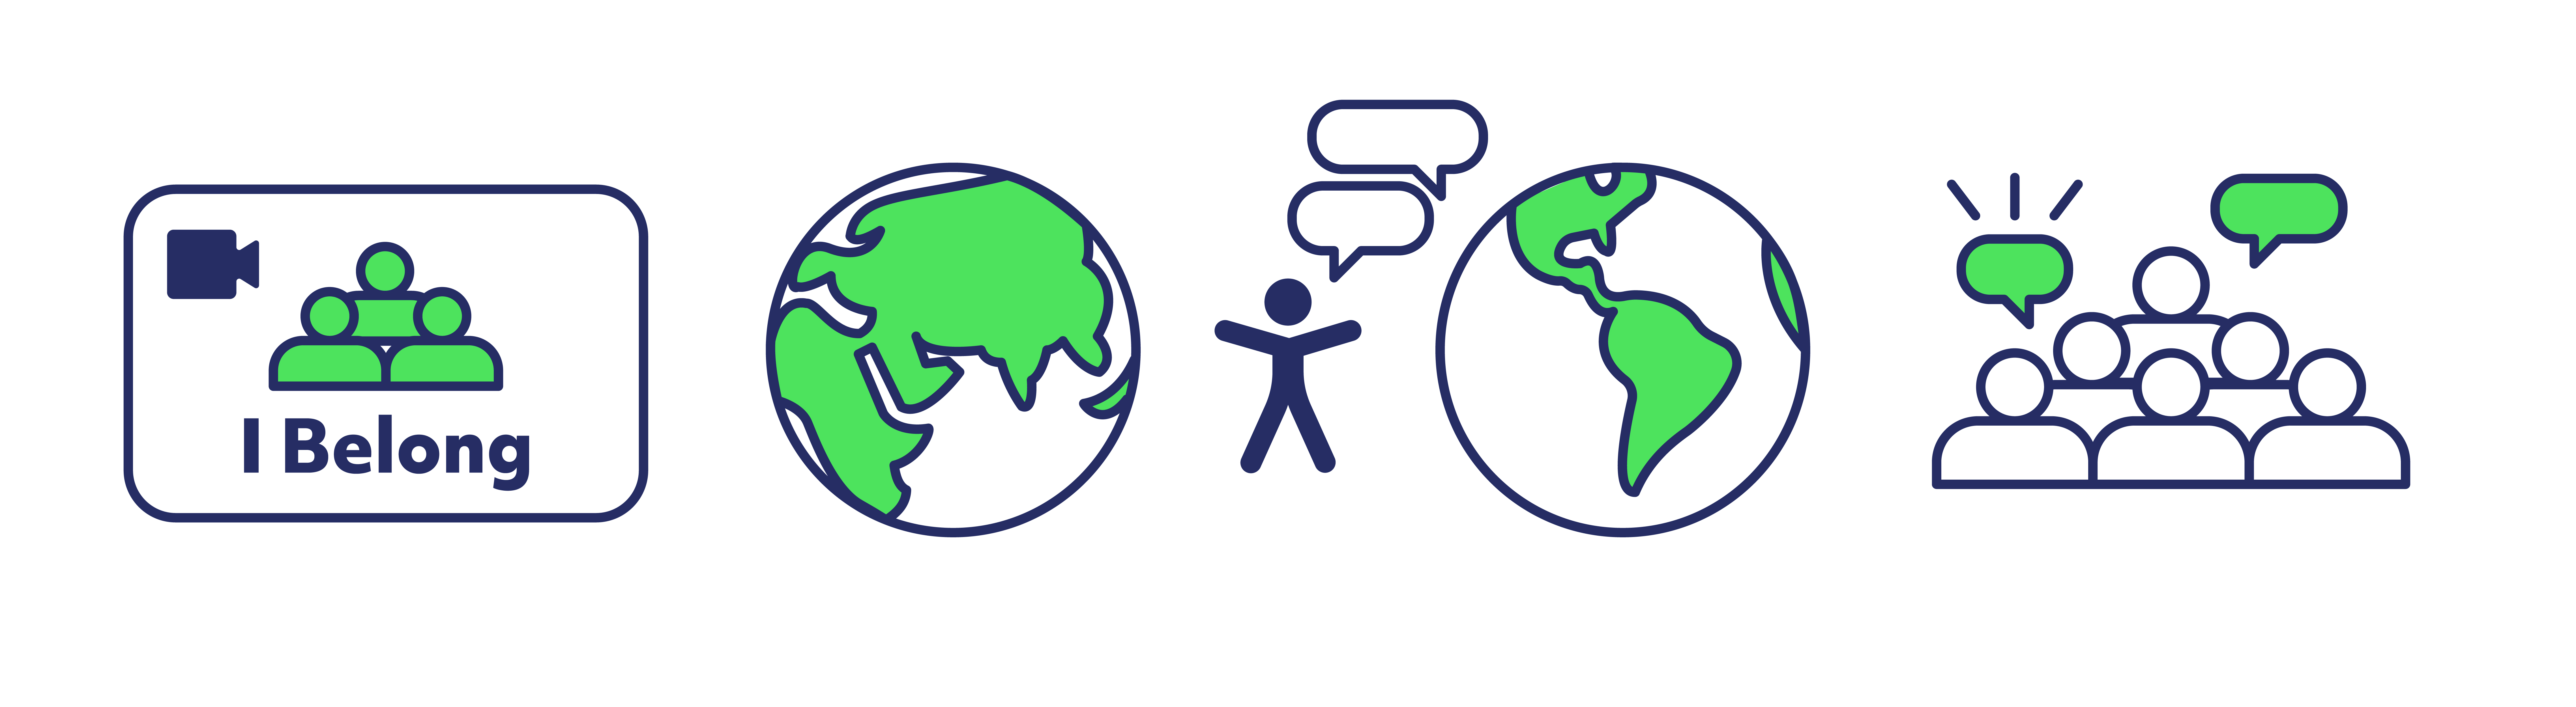 Icons of three silhouettes in a rounded rectangle and video with "I Belong" underneath, two globe icons with speech bubbles and accessibility symbol, and six silhouettes with speech bubbles.